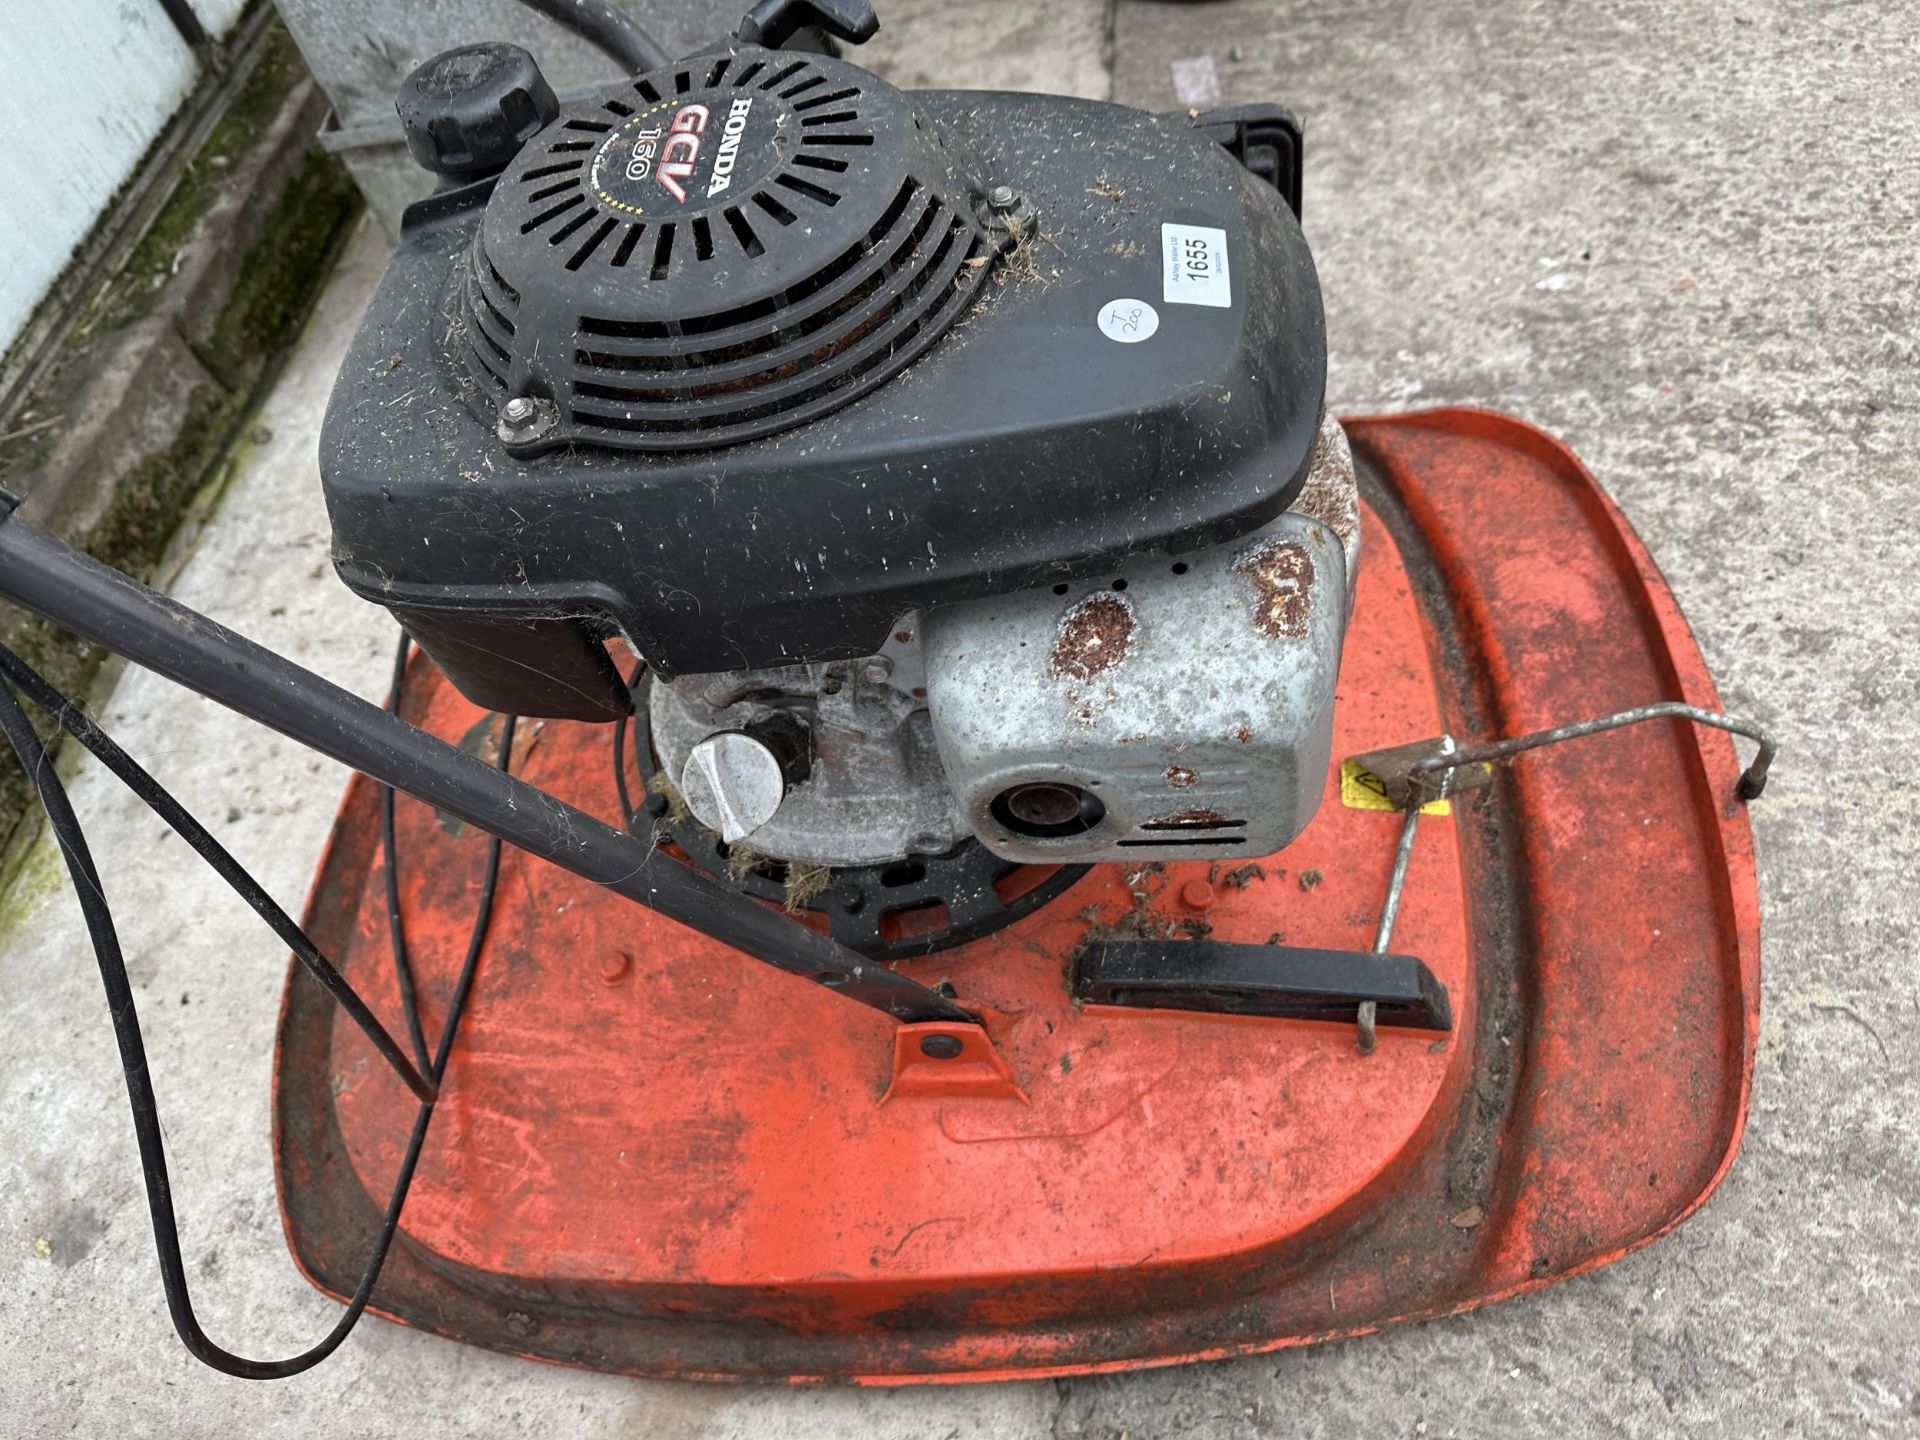 A FLYMO LAWN MOWER WITH HONDA ENGINE - Image 2 of 3